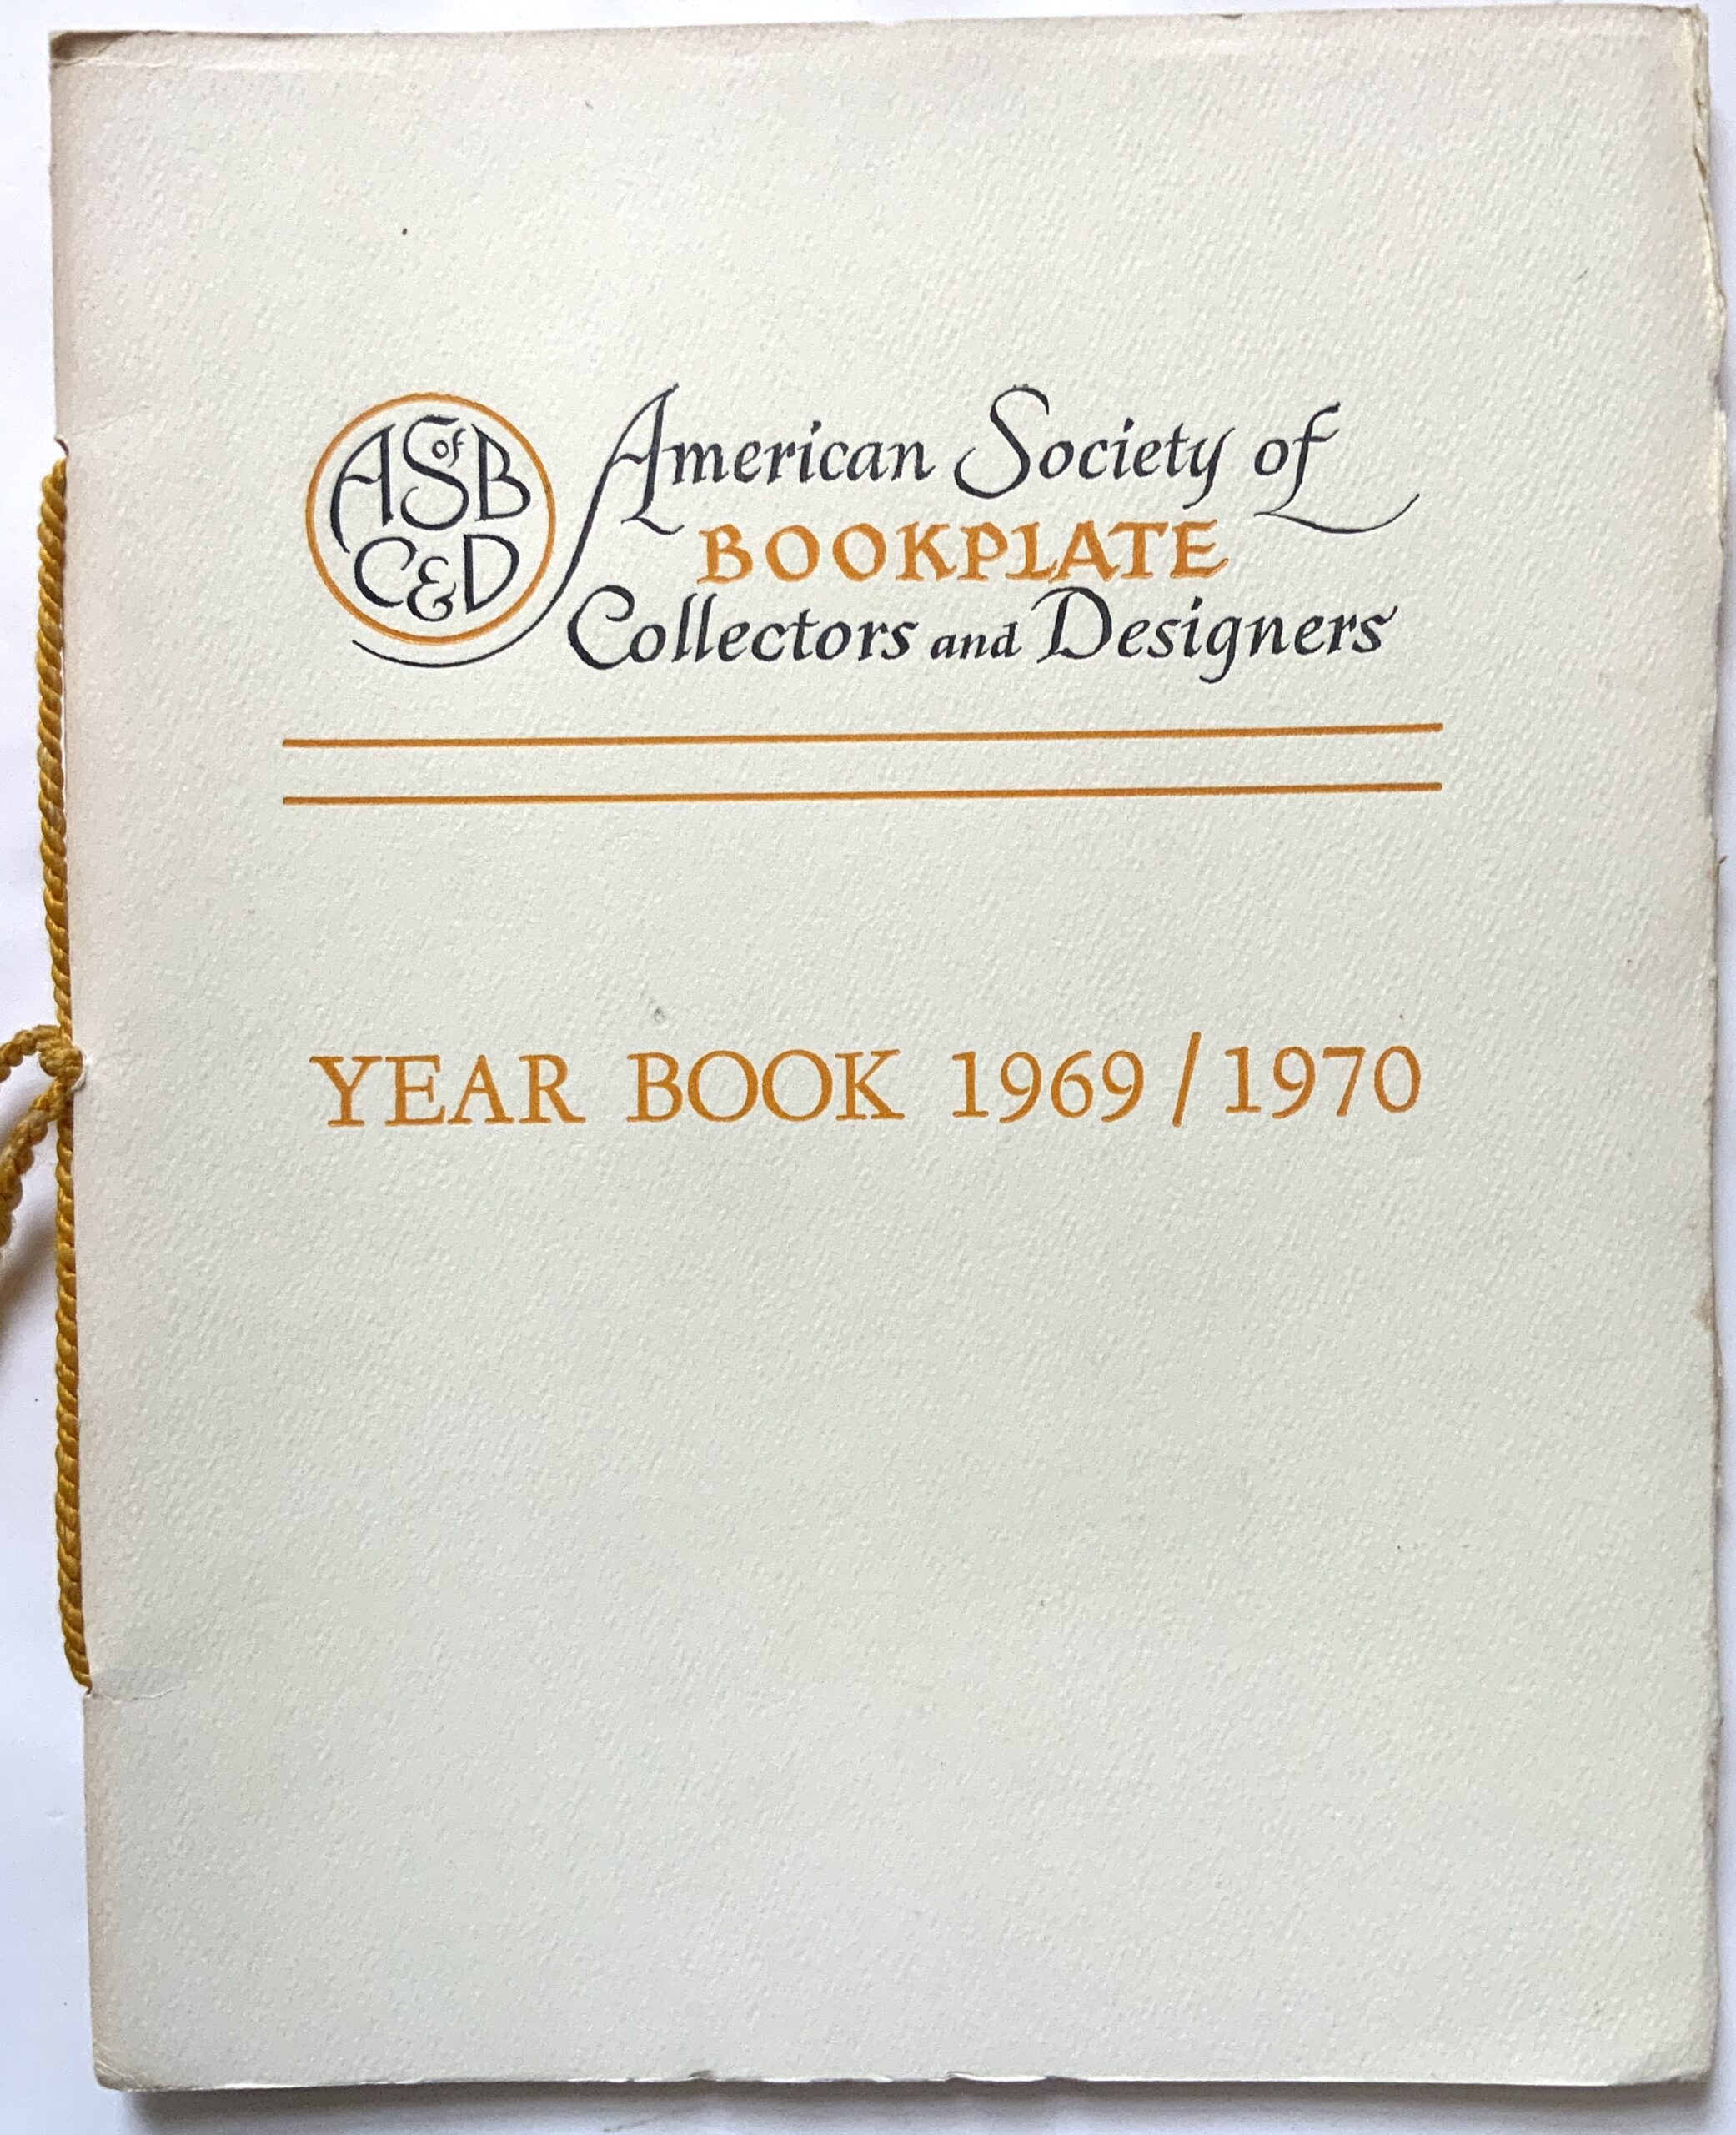 M504	AMERICAN SOCIETY OF BOOKPLATE COLLECTORS AND DESIGNERS YEAR BOOK -  VOLUME 35 - 1969/1970